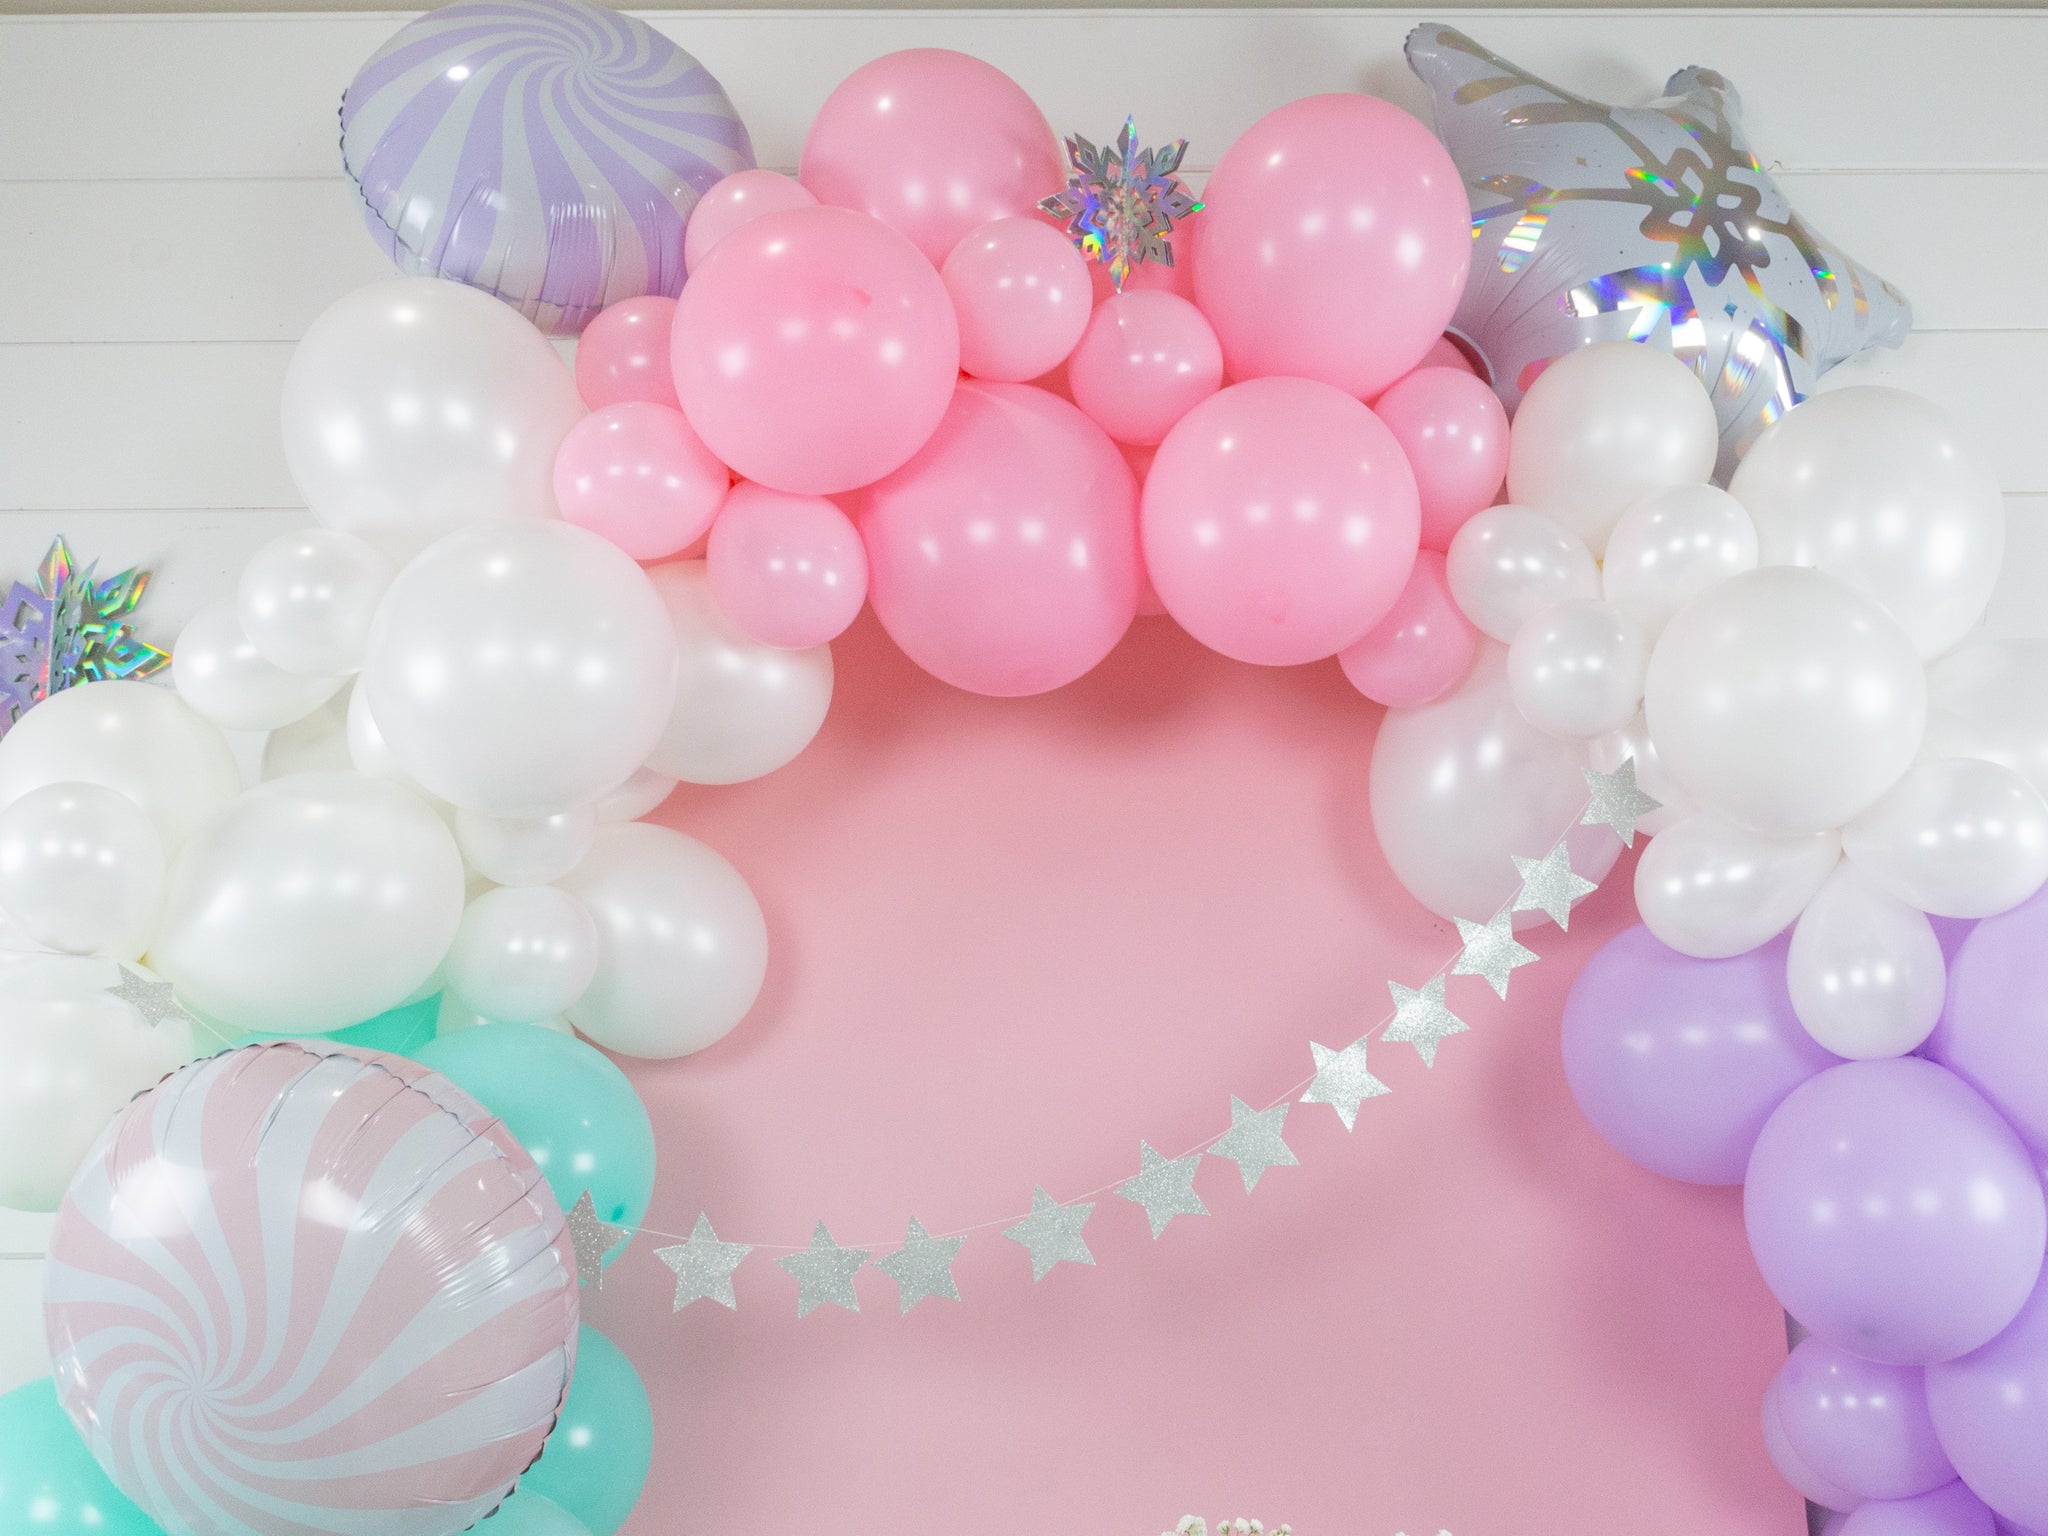 Sugar Plum Fairy Party Balloons | The Party Darling